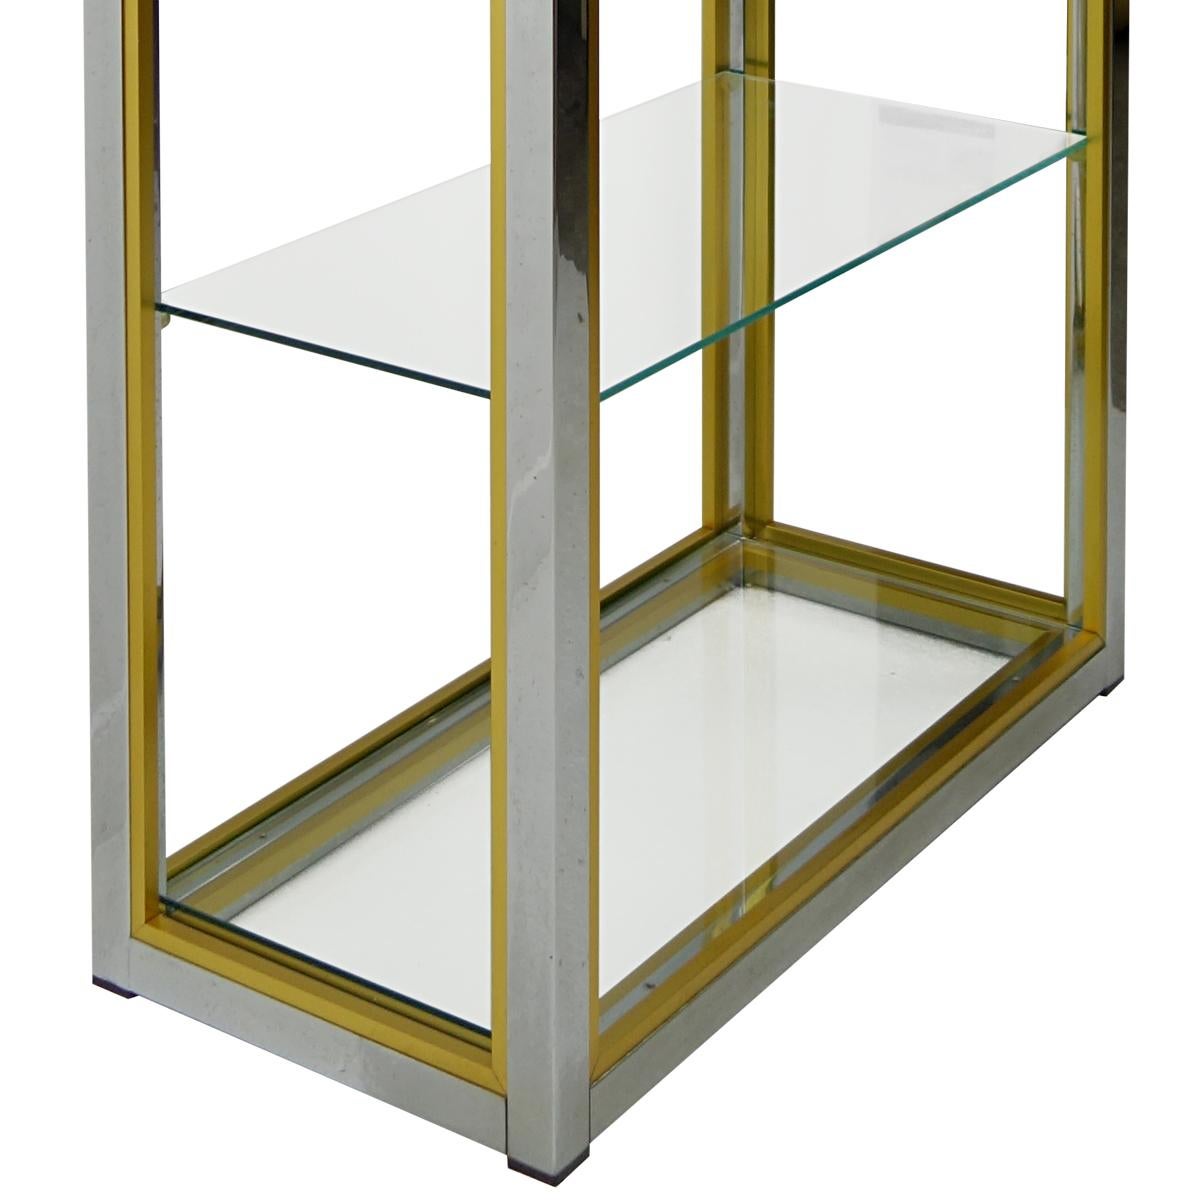 Late 20th Century Set of 2 Hollywood Regency Étagères in Brass and Smoked Glass by Renato Zevi